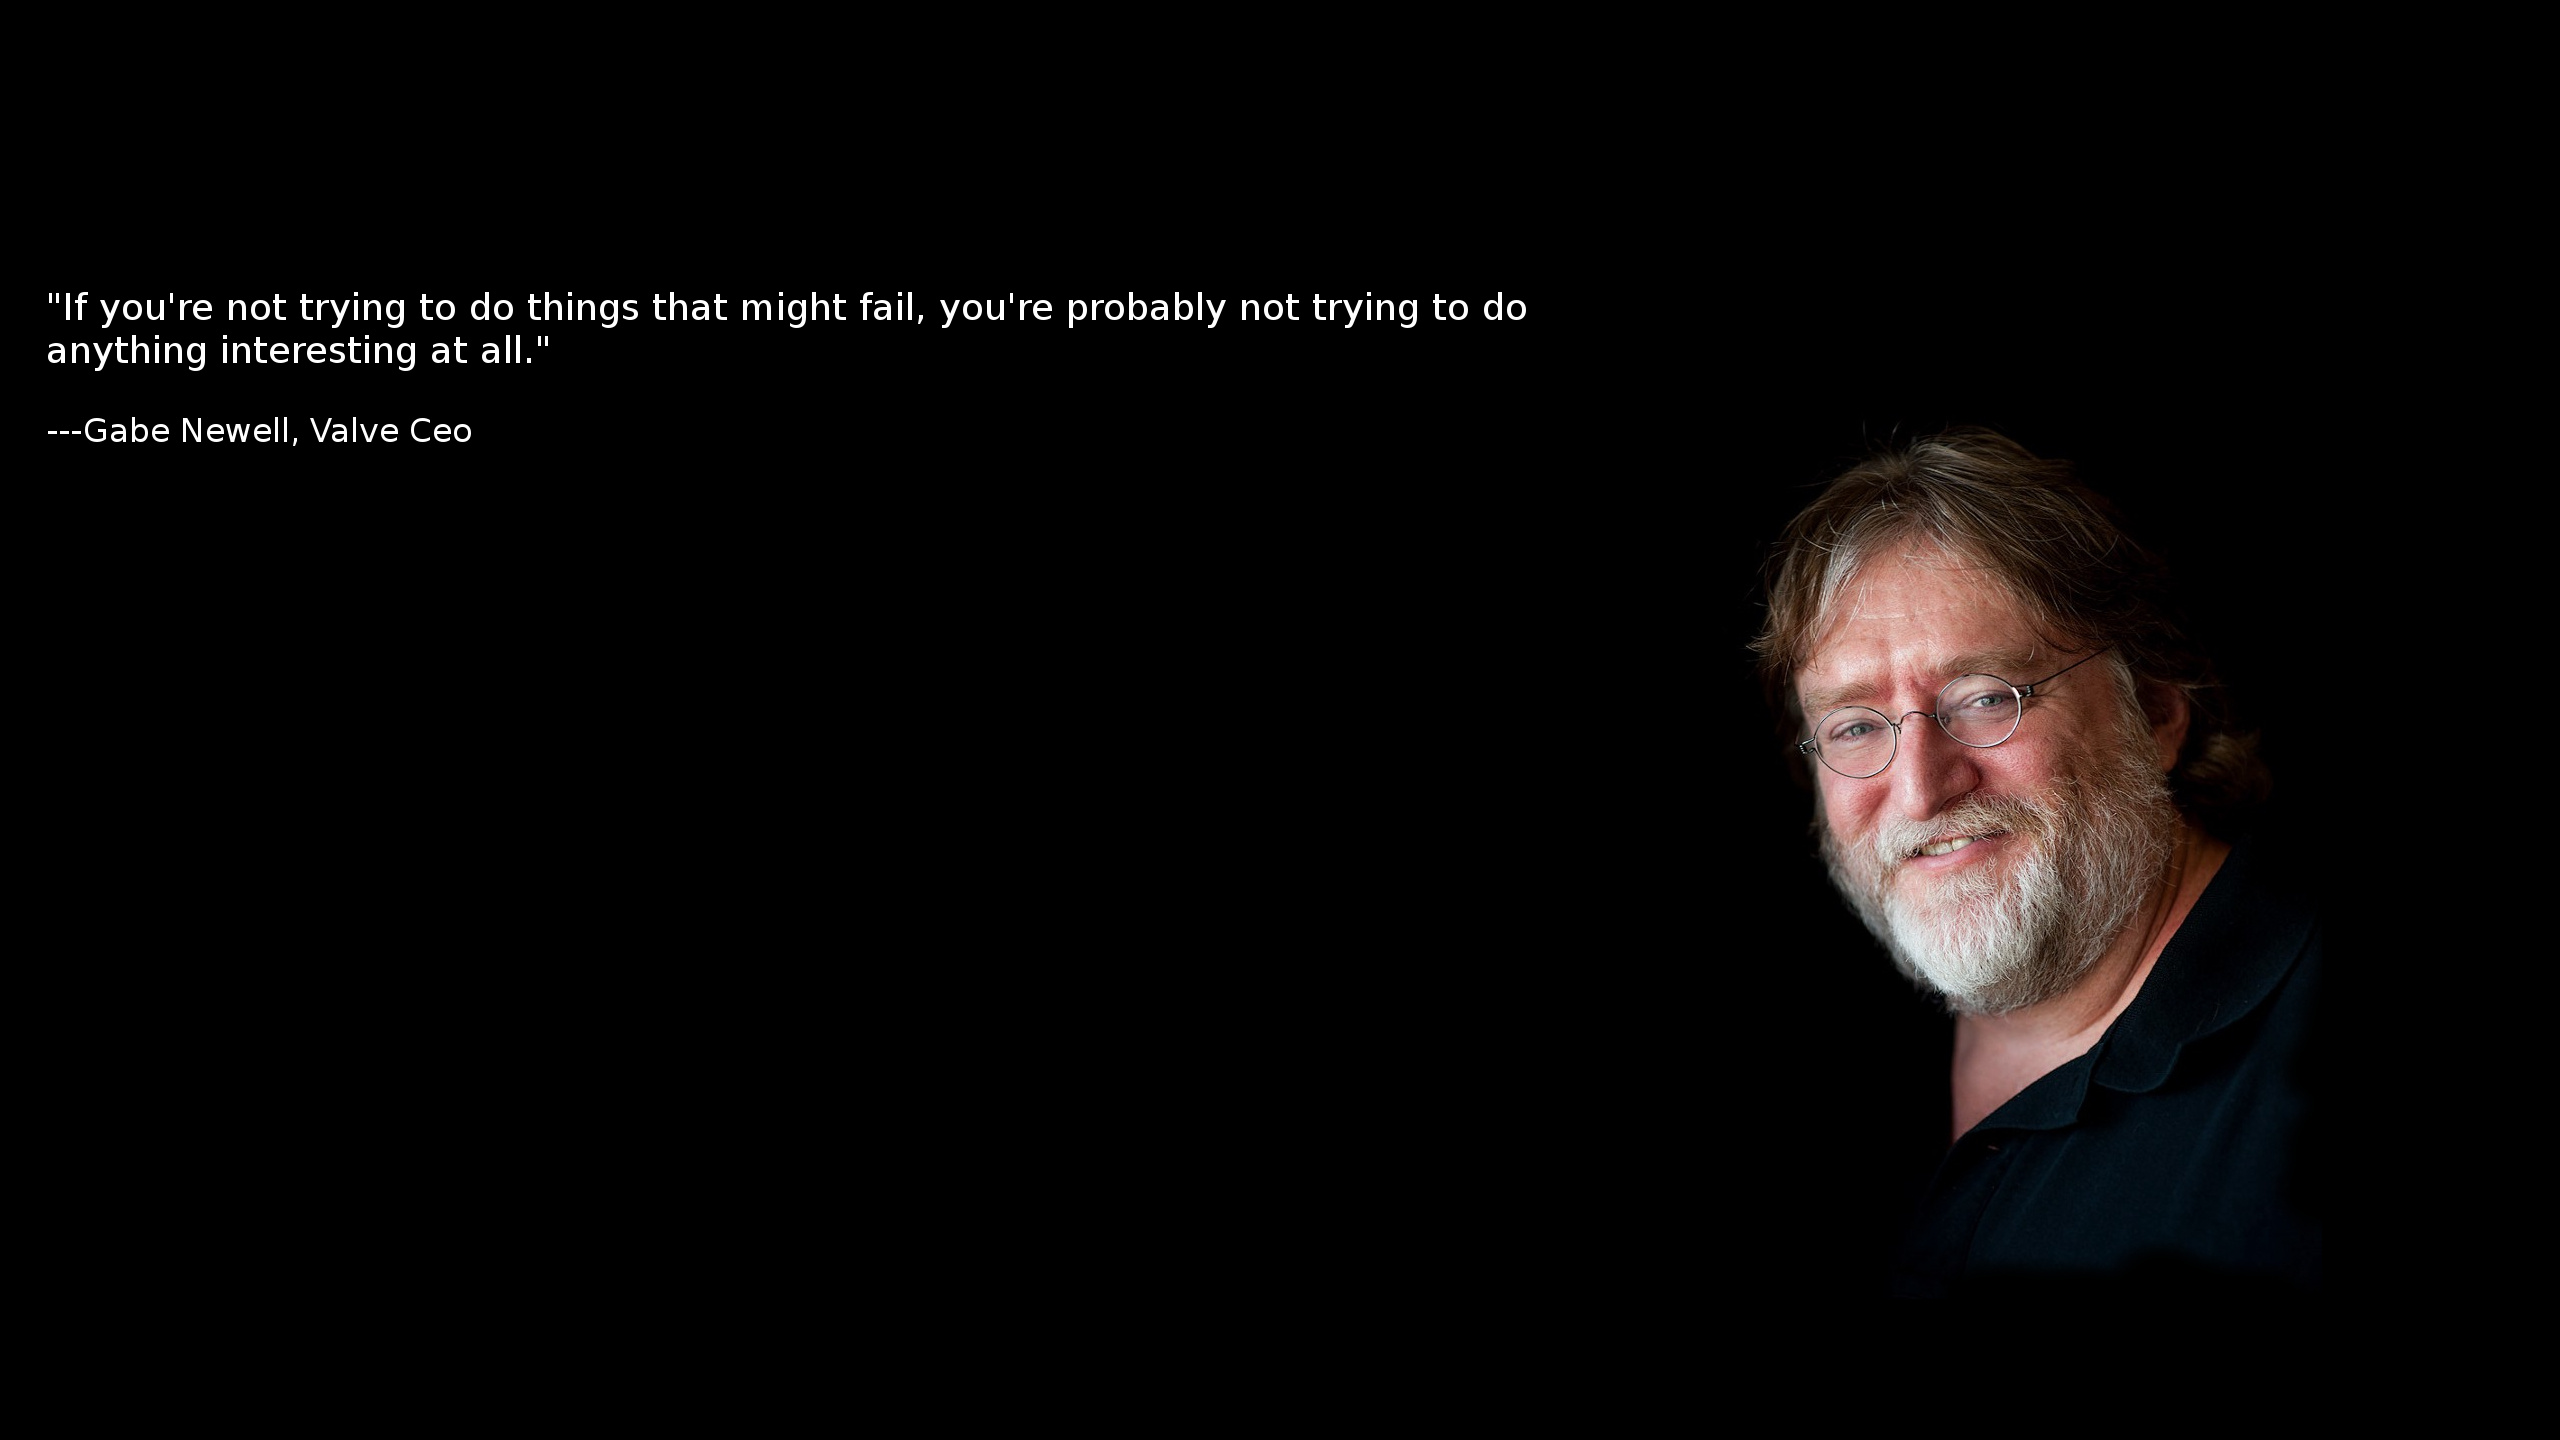 Gabe Newell (Gaming), Life quote, Rwallpapers, 2560x1440 HD Desktop